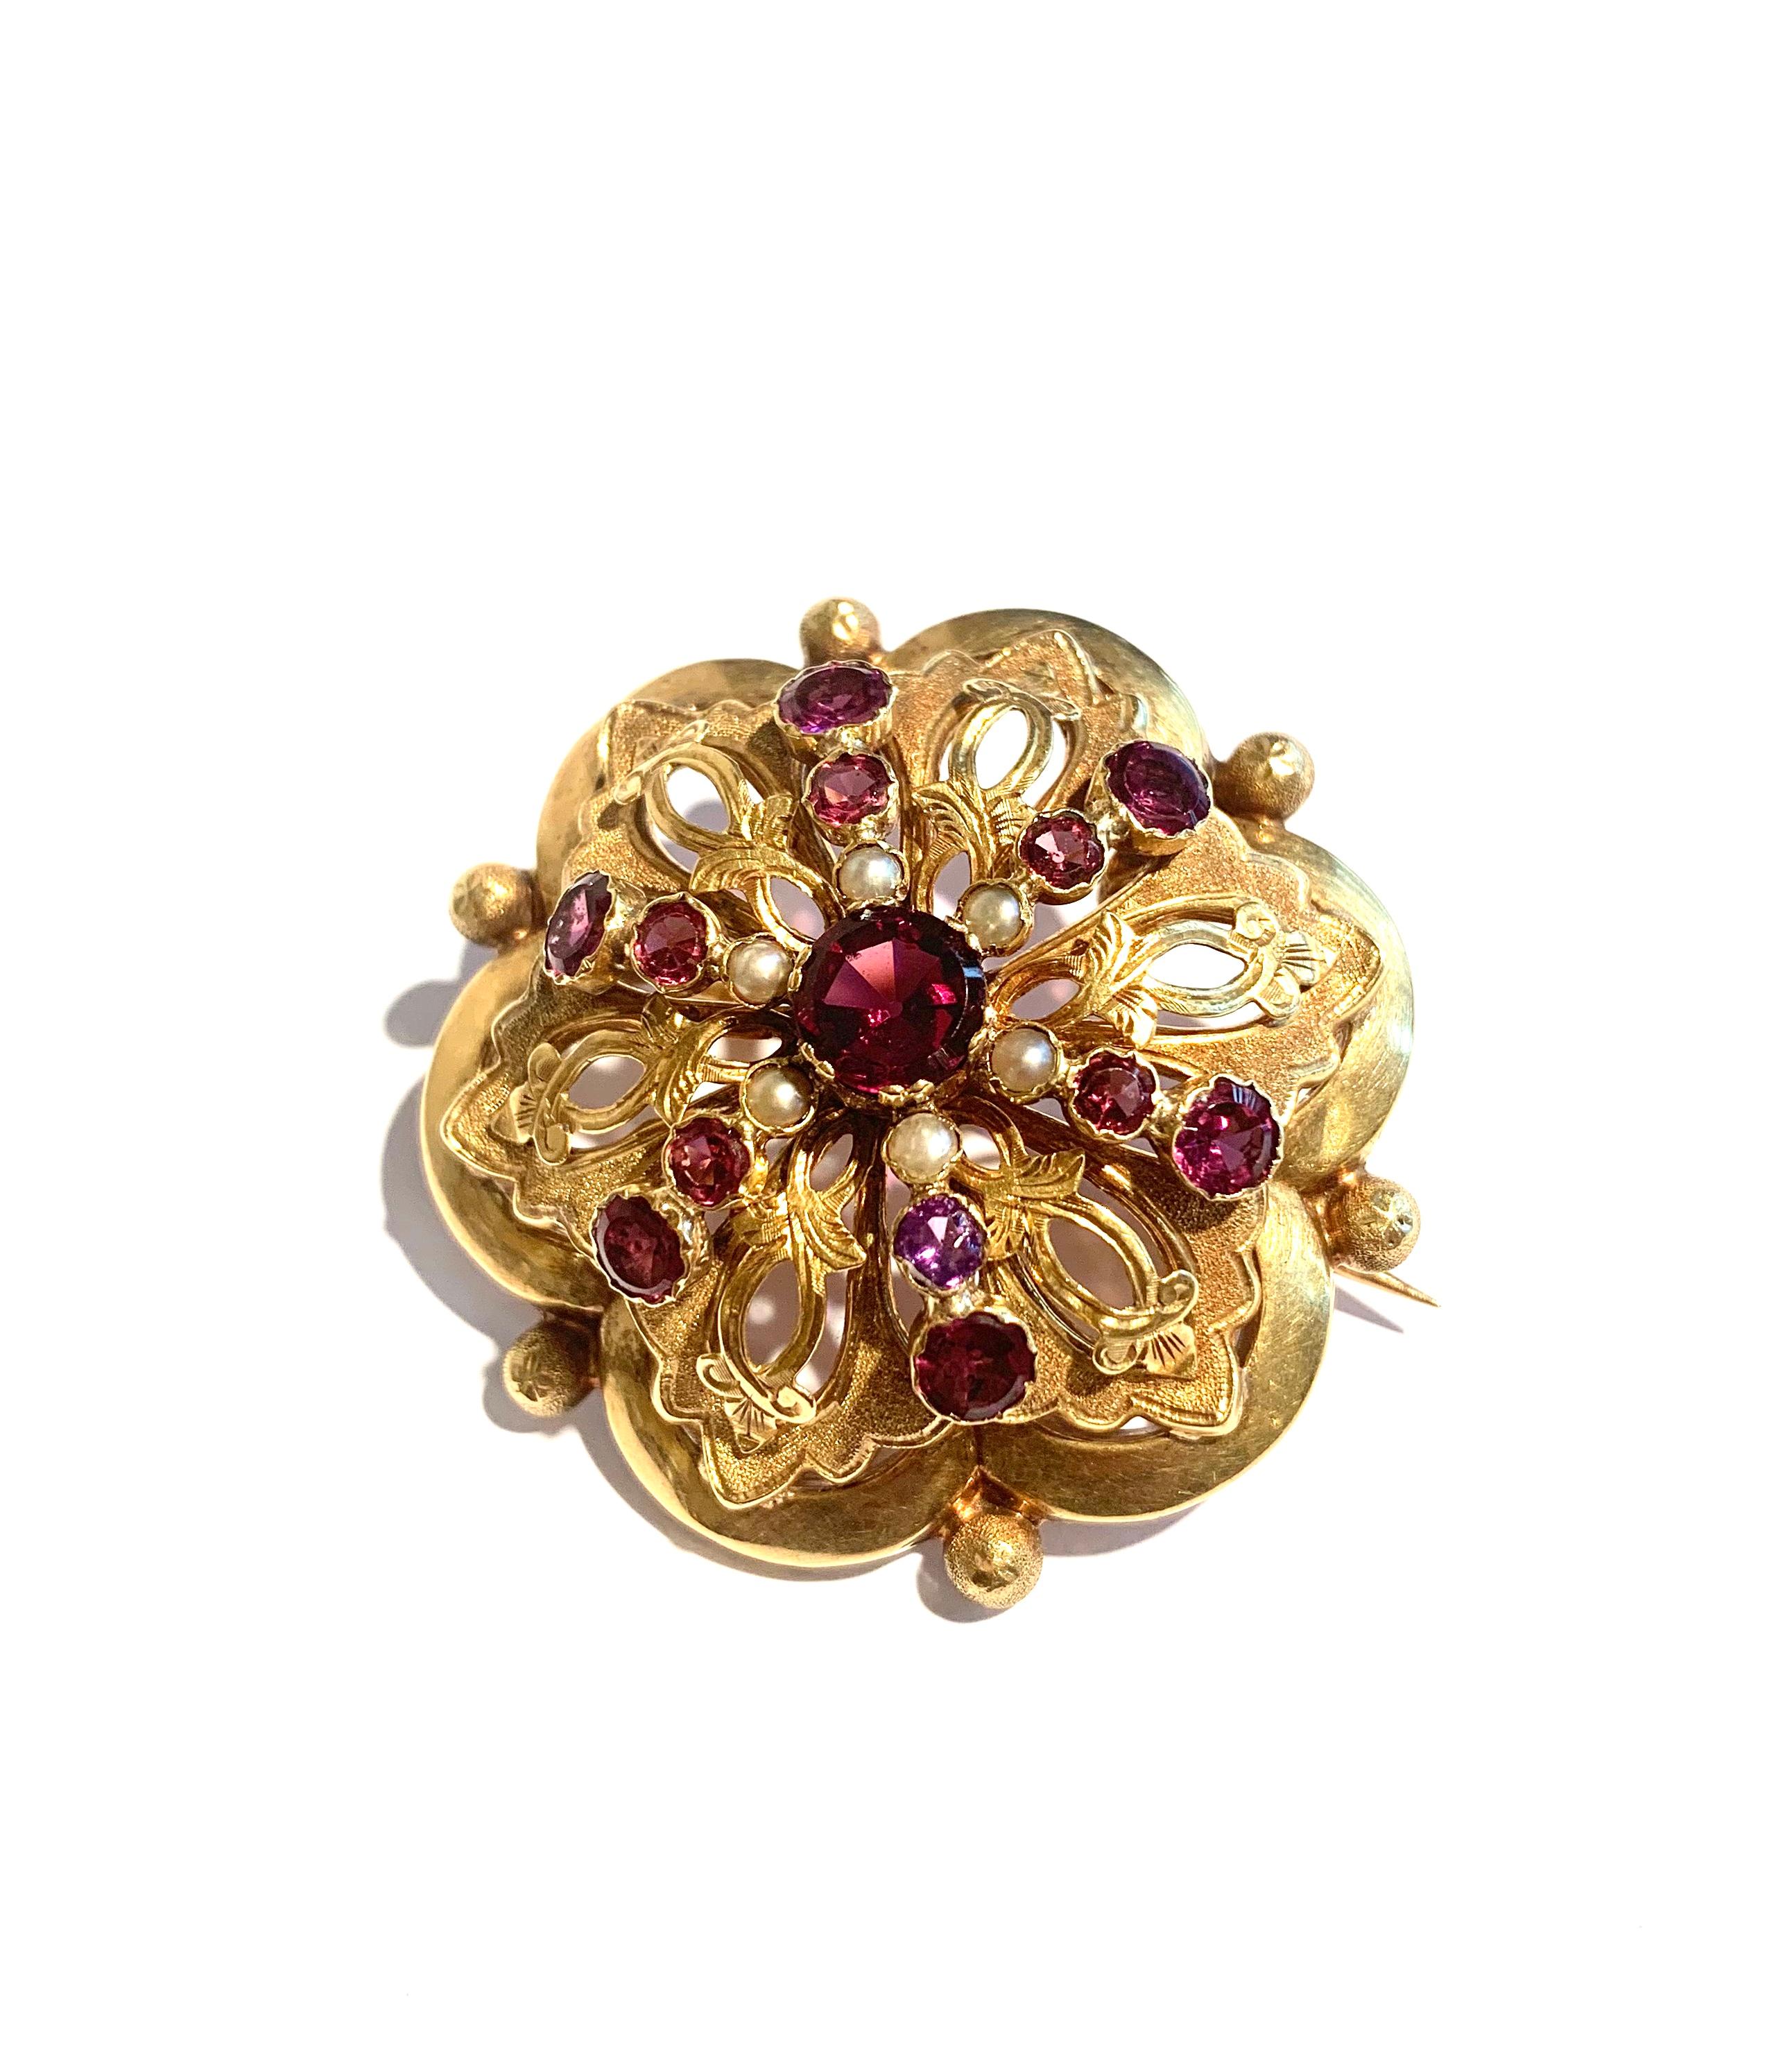 Brooch set with amethyst, garnet and pearls.

The main stone is surounded by brillant cut amethysts and garnets, orned by six grey pearls.

18 carats yellow gold, 750/00th (eagle's head hallmark punch).

Dimensions : 43 x 41 x 20 mm (1.69 x 1.61 x